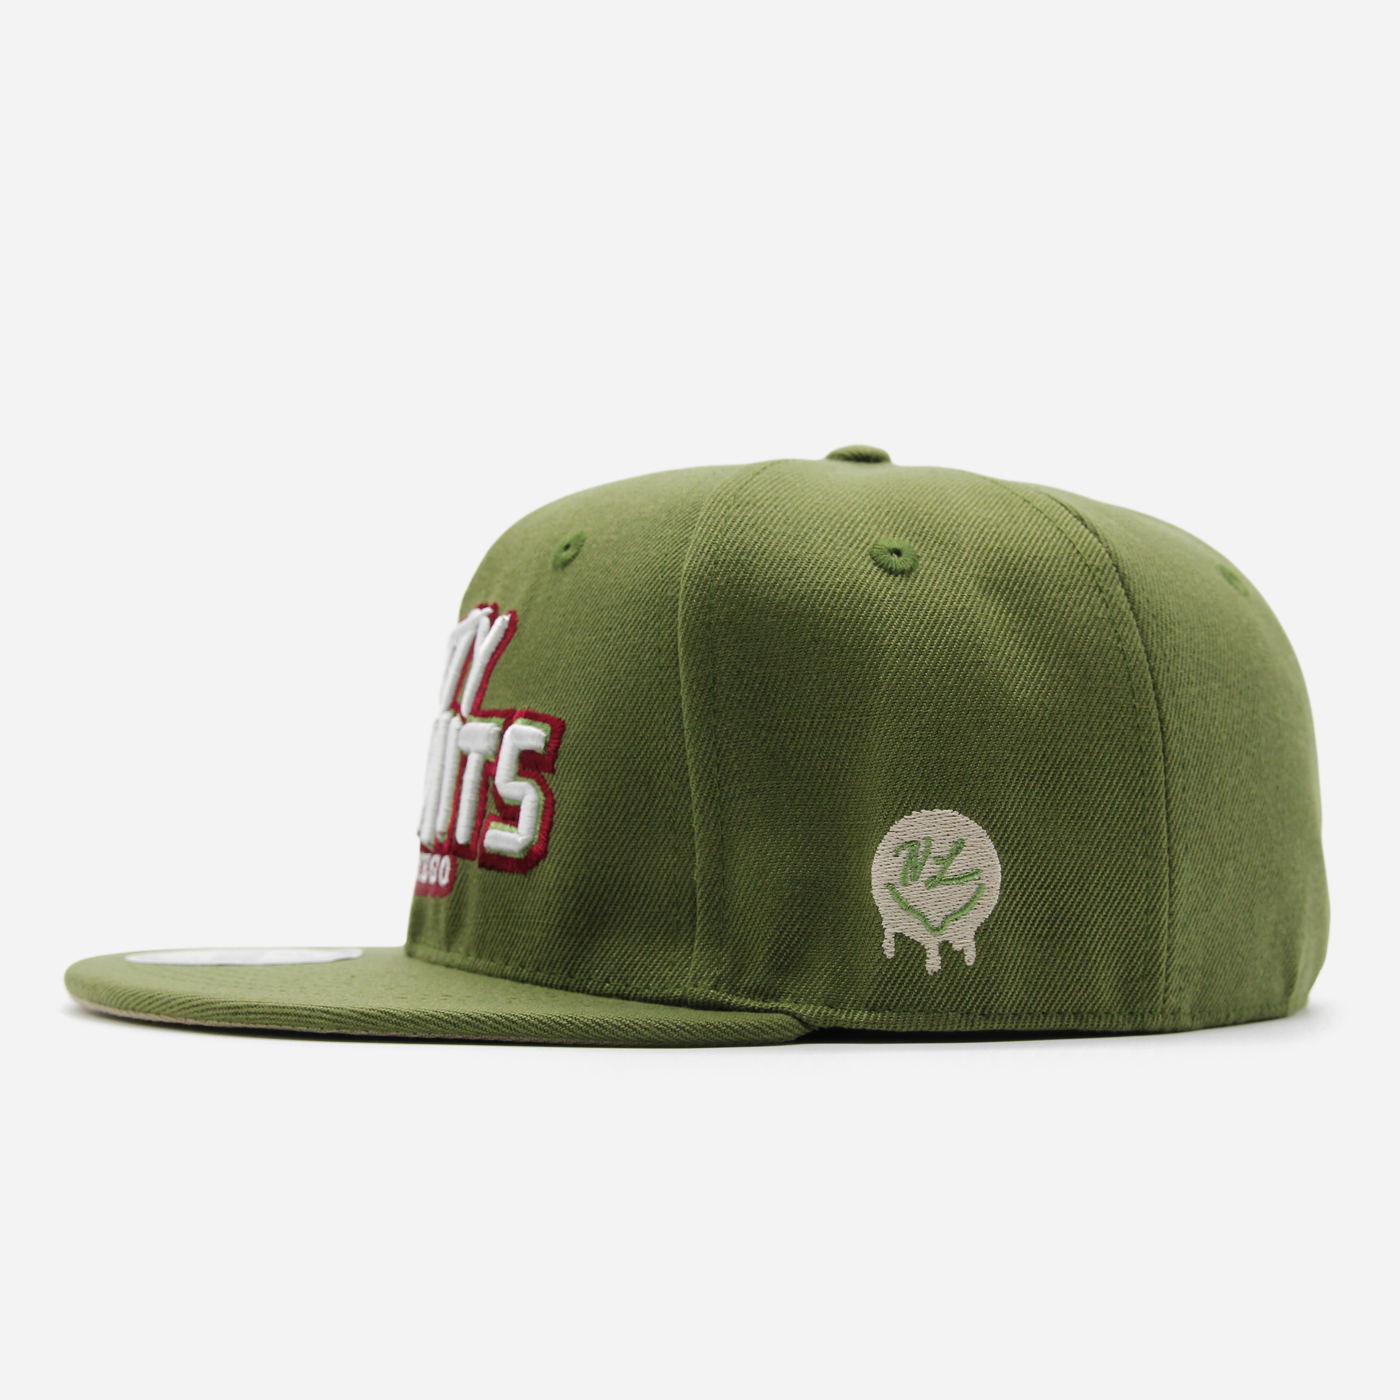 San Diego Dirty Kermits Text Logo fitted Olive